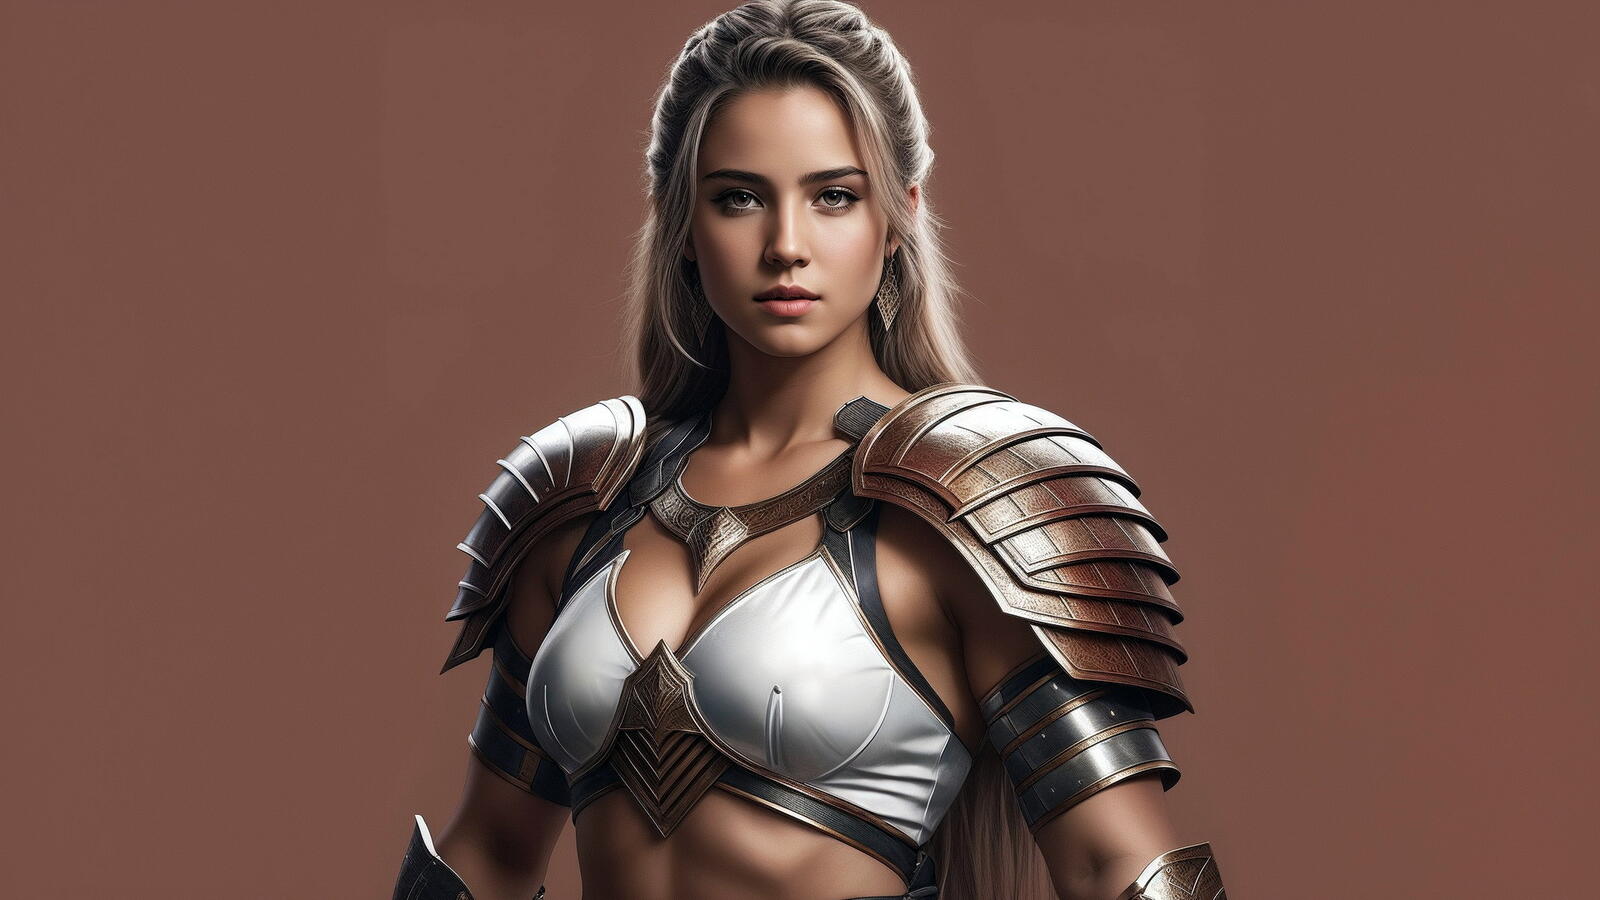 Free photo Girl warrior in light armor on coffee background